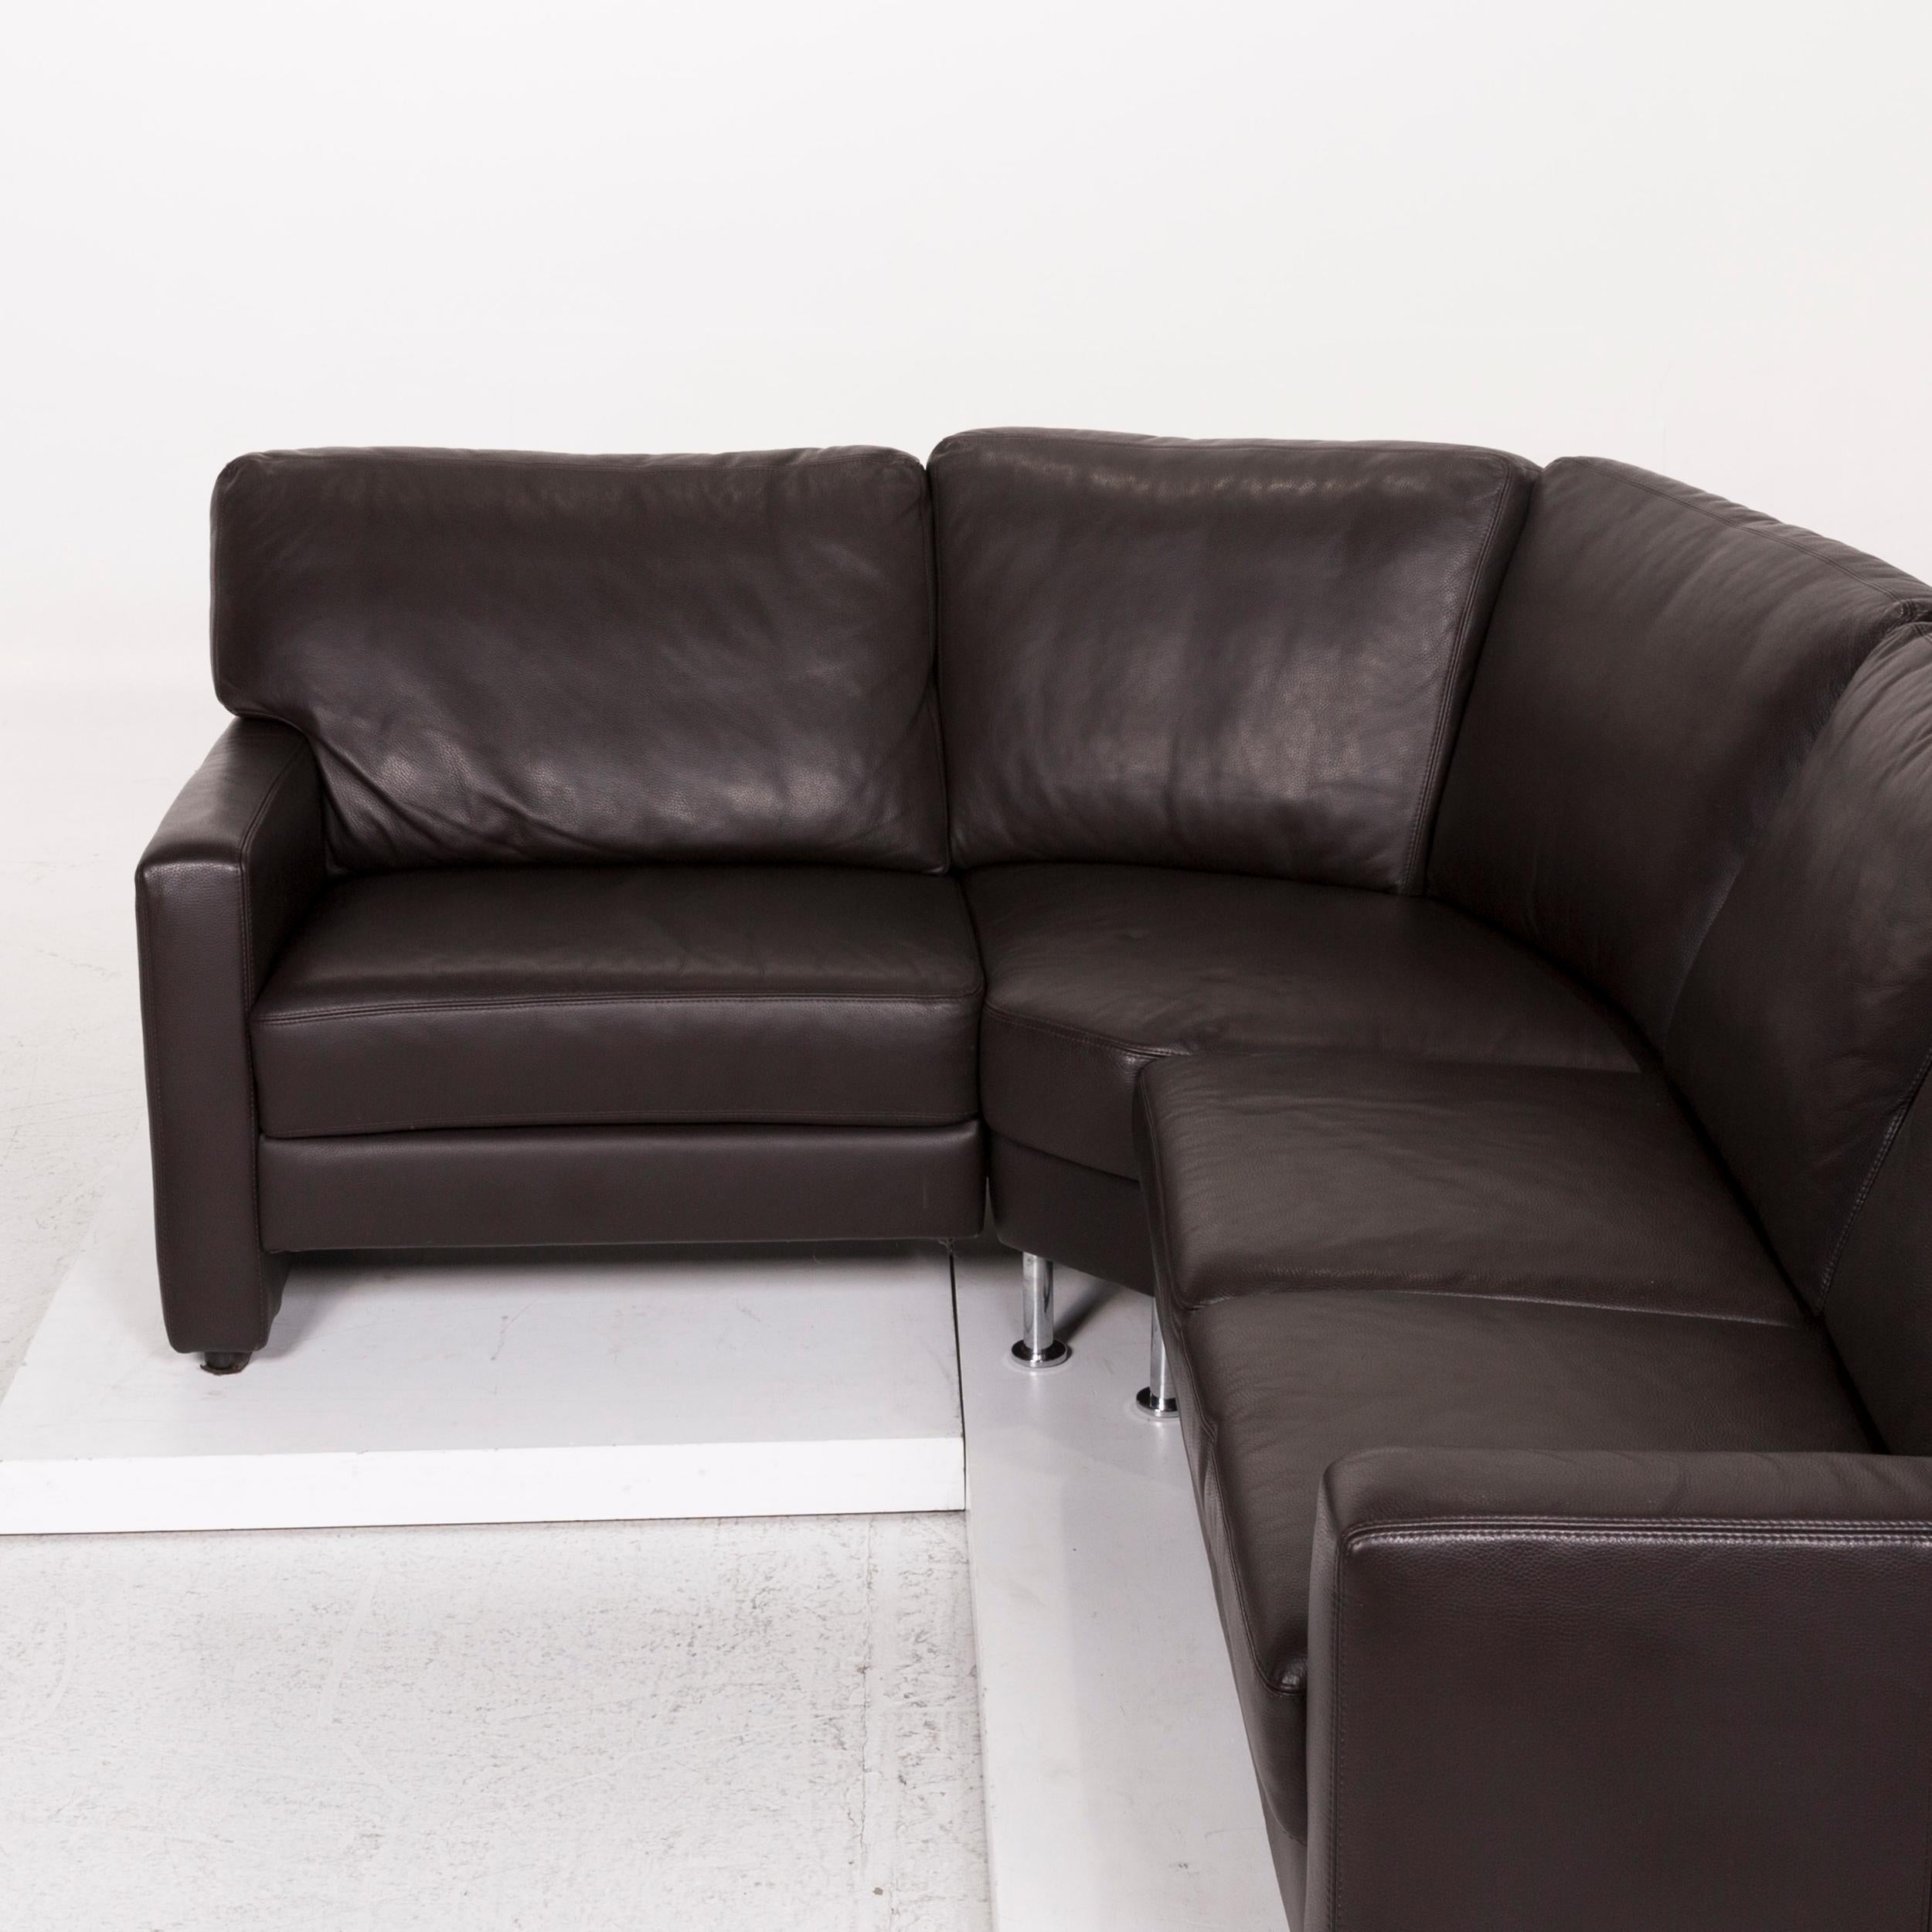 Sample Ring Leather Corner Sofa Brown Dark Brown Sofa Couch In Good Condition For Sale In Cologne, DE